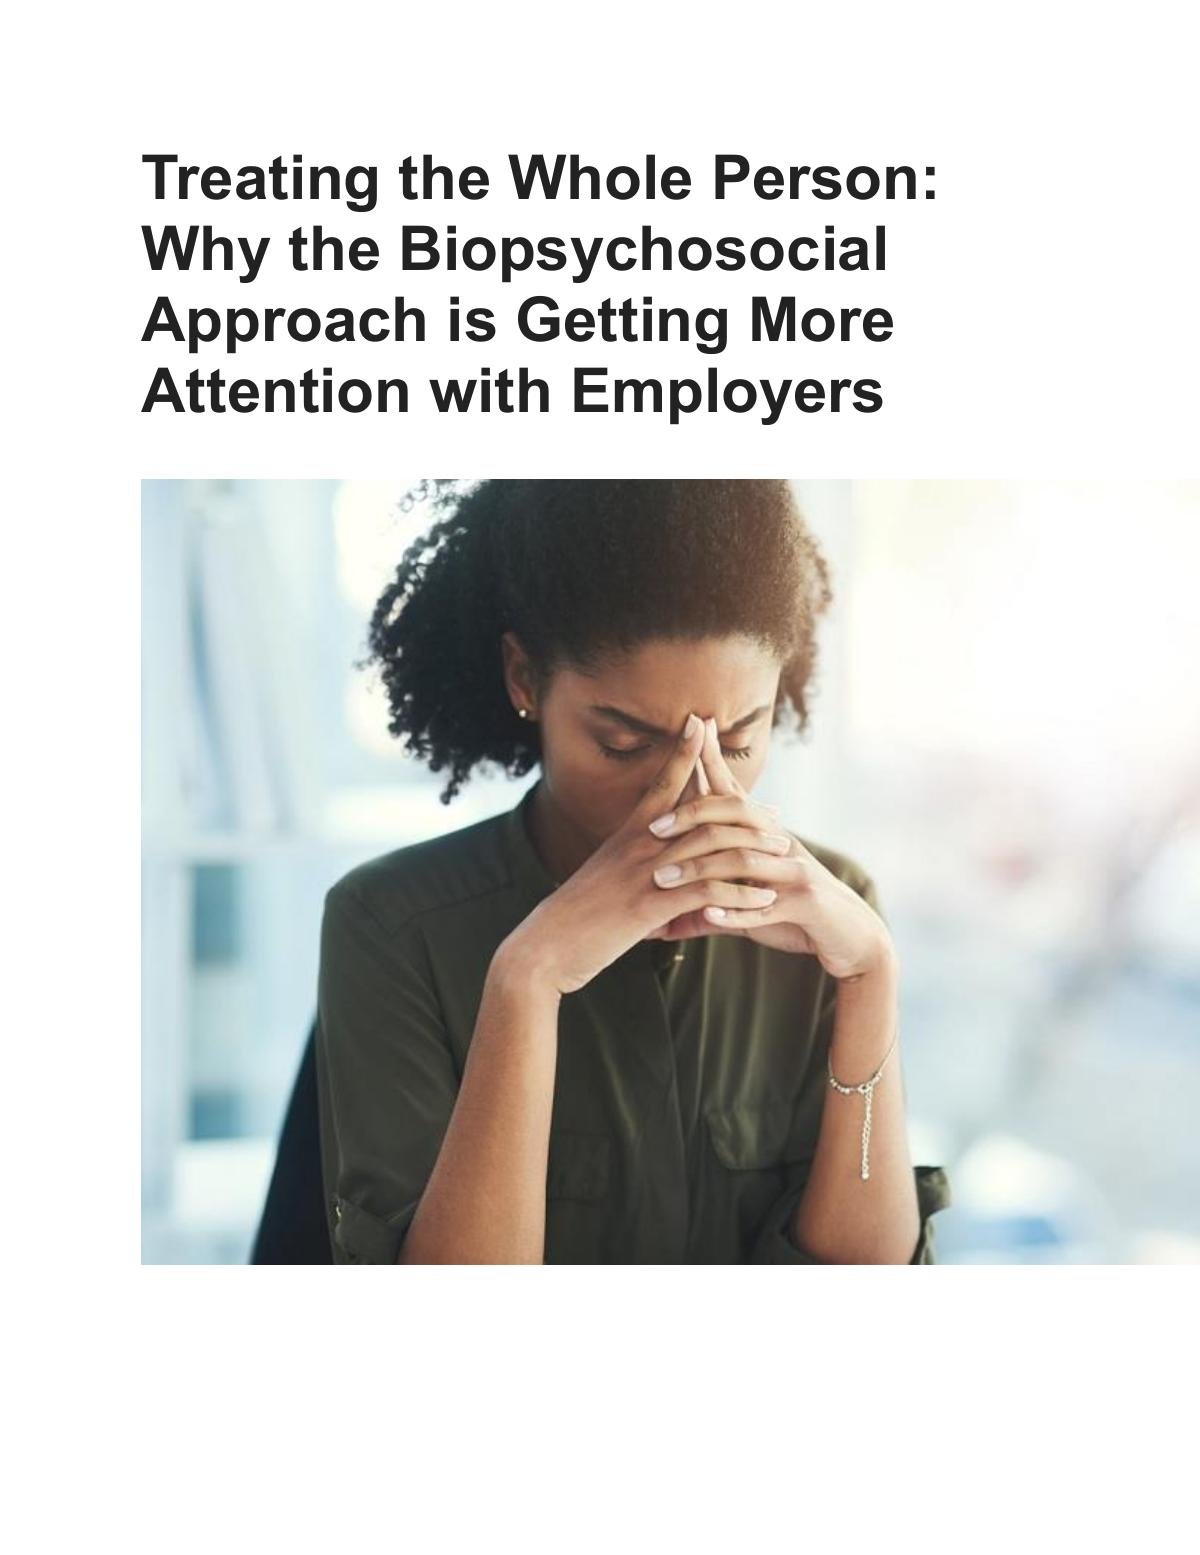 Treating the Whole Person: Why the Biopsychosocial Approach is Getting More Attention with Employers